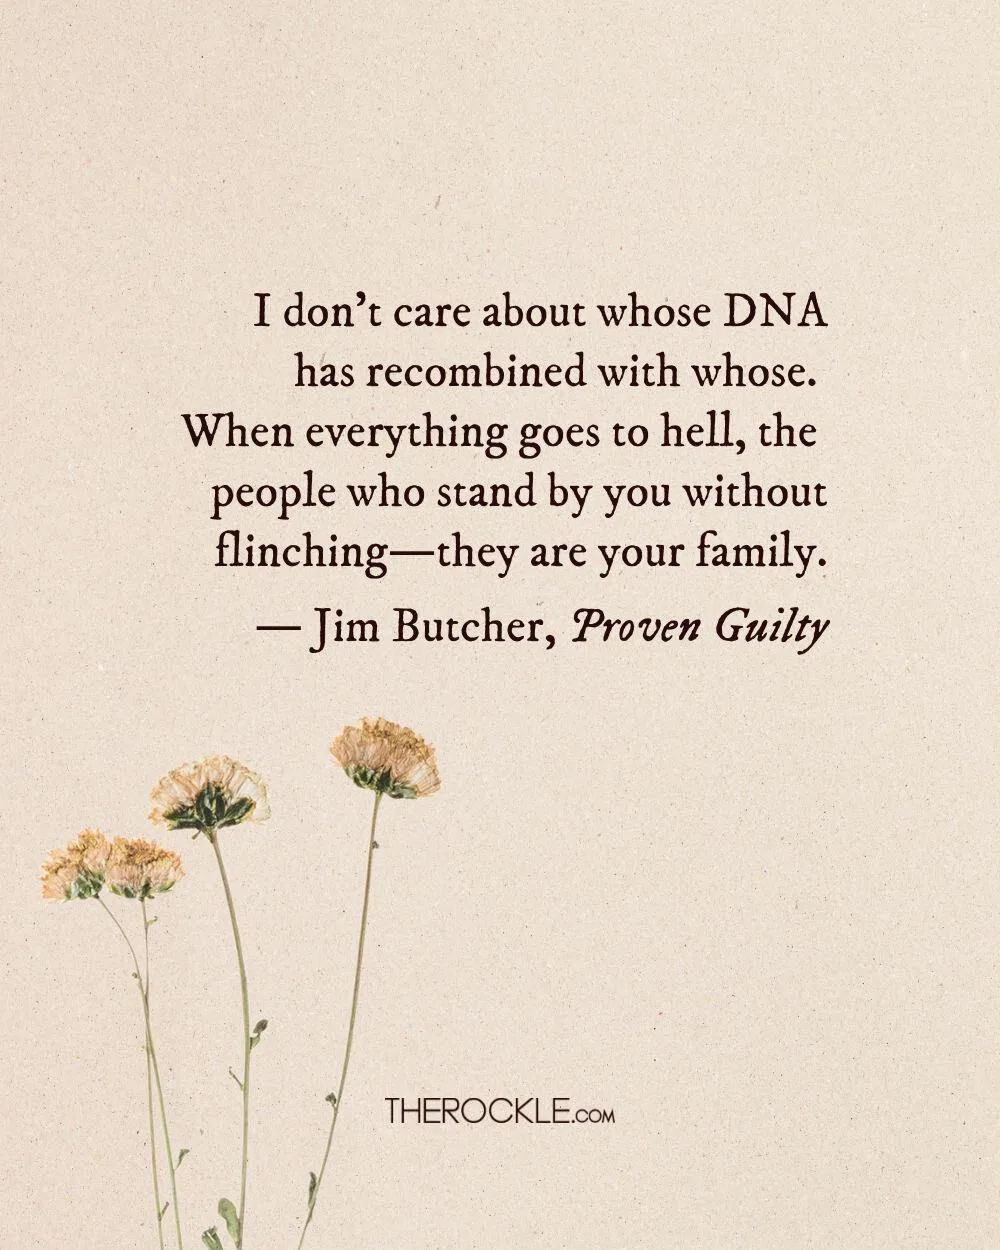 Jim Butcher quote on friendship and support through hard times